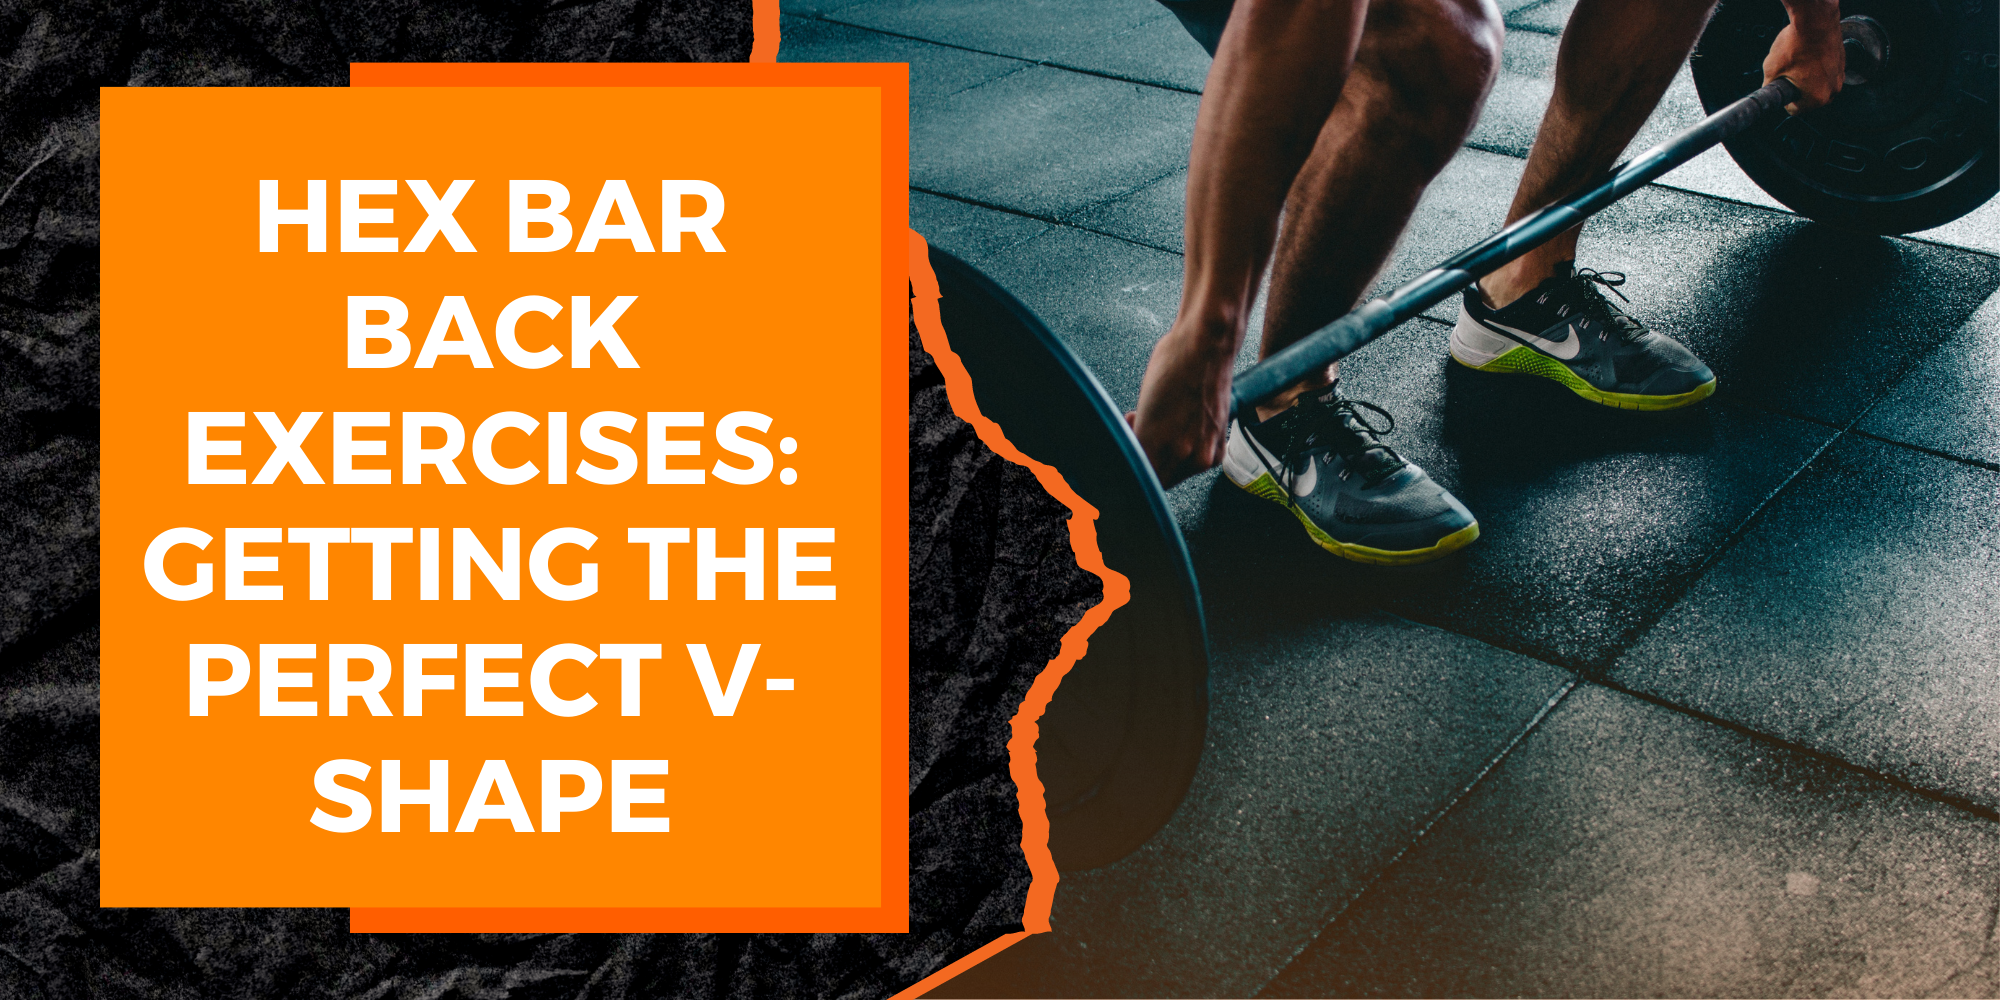 Hex Bar Exercises for Your Back: Getting the Perfect V-Shape